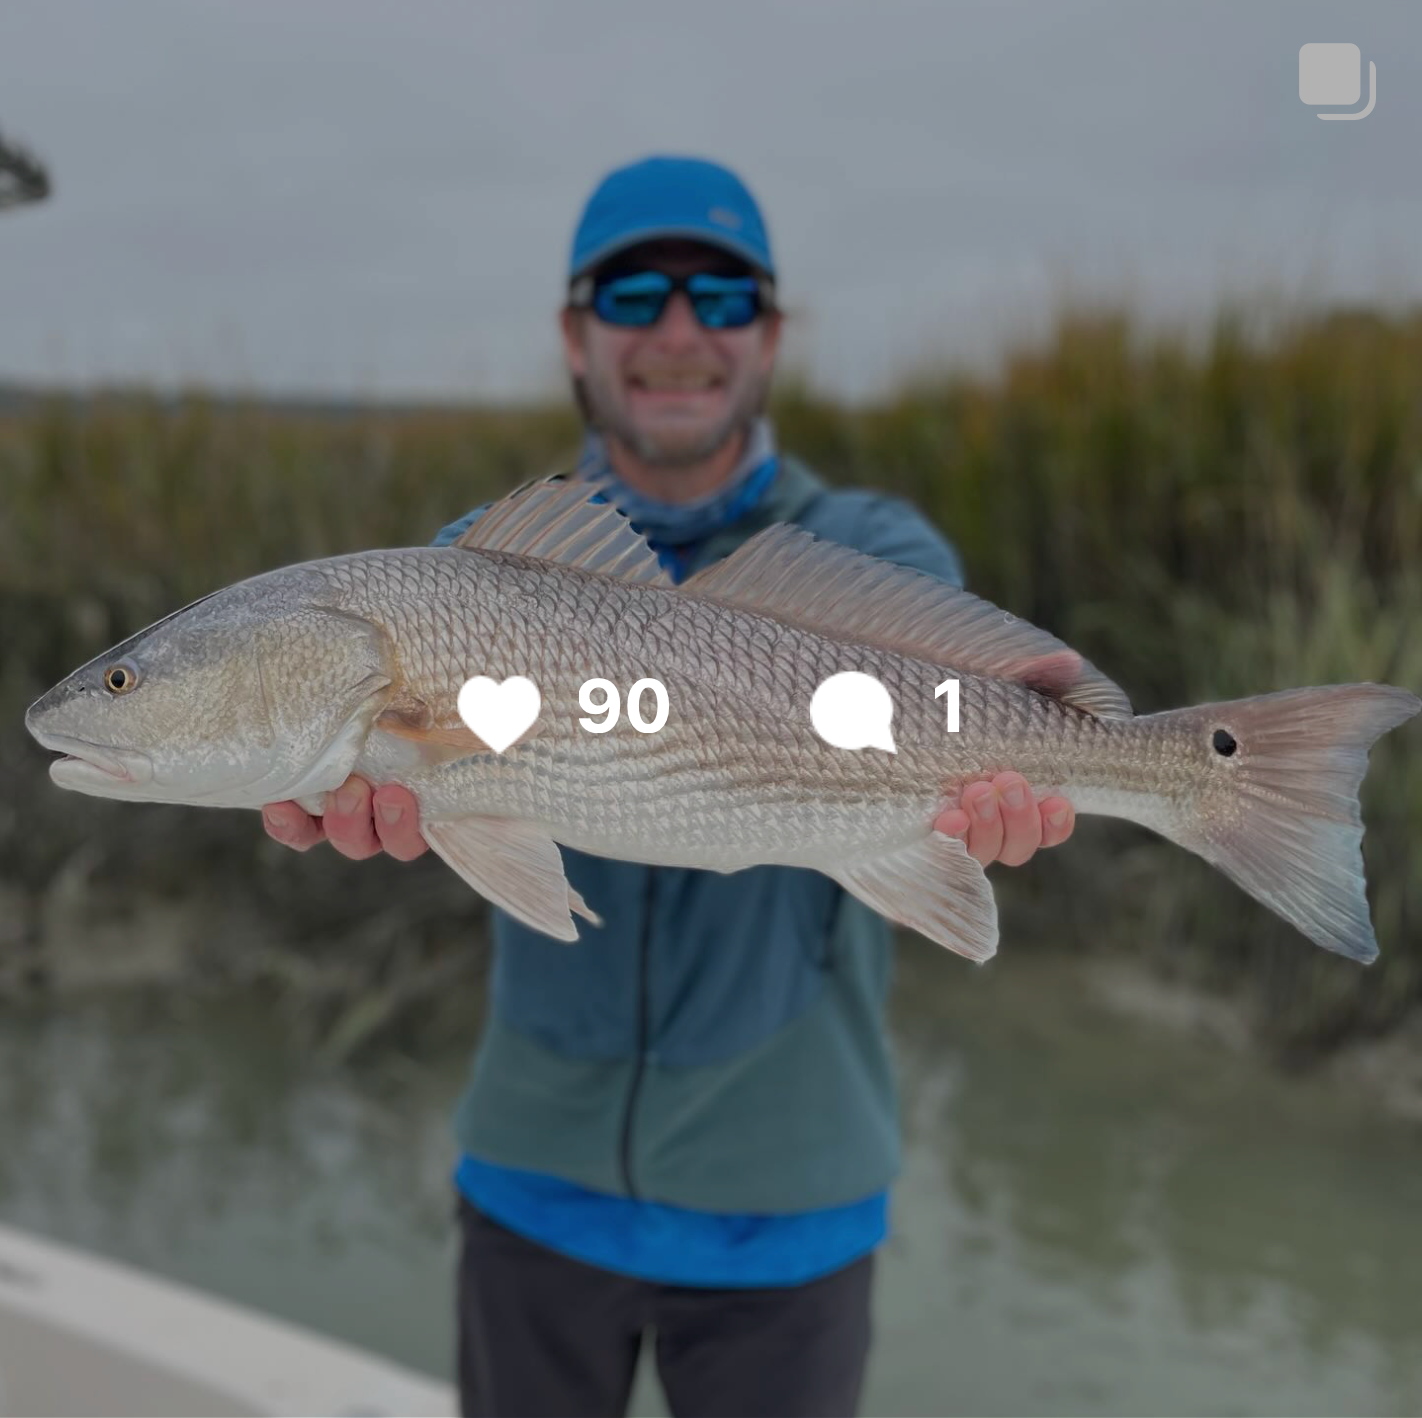 This cold front thats pushing in had the redfish absolutely chewing today!